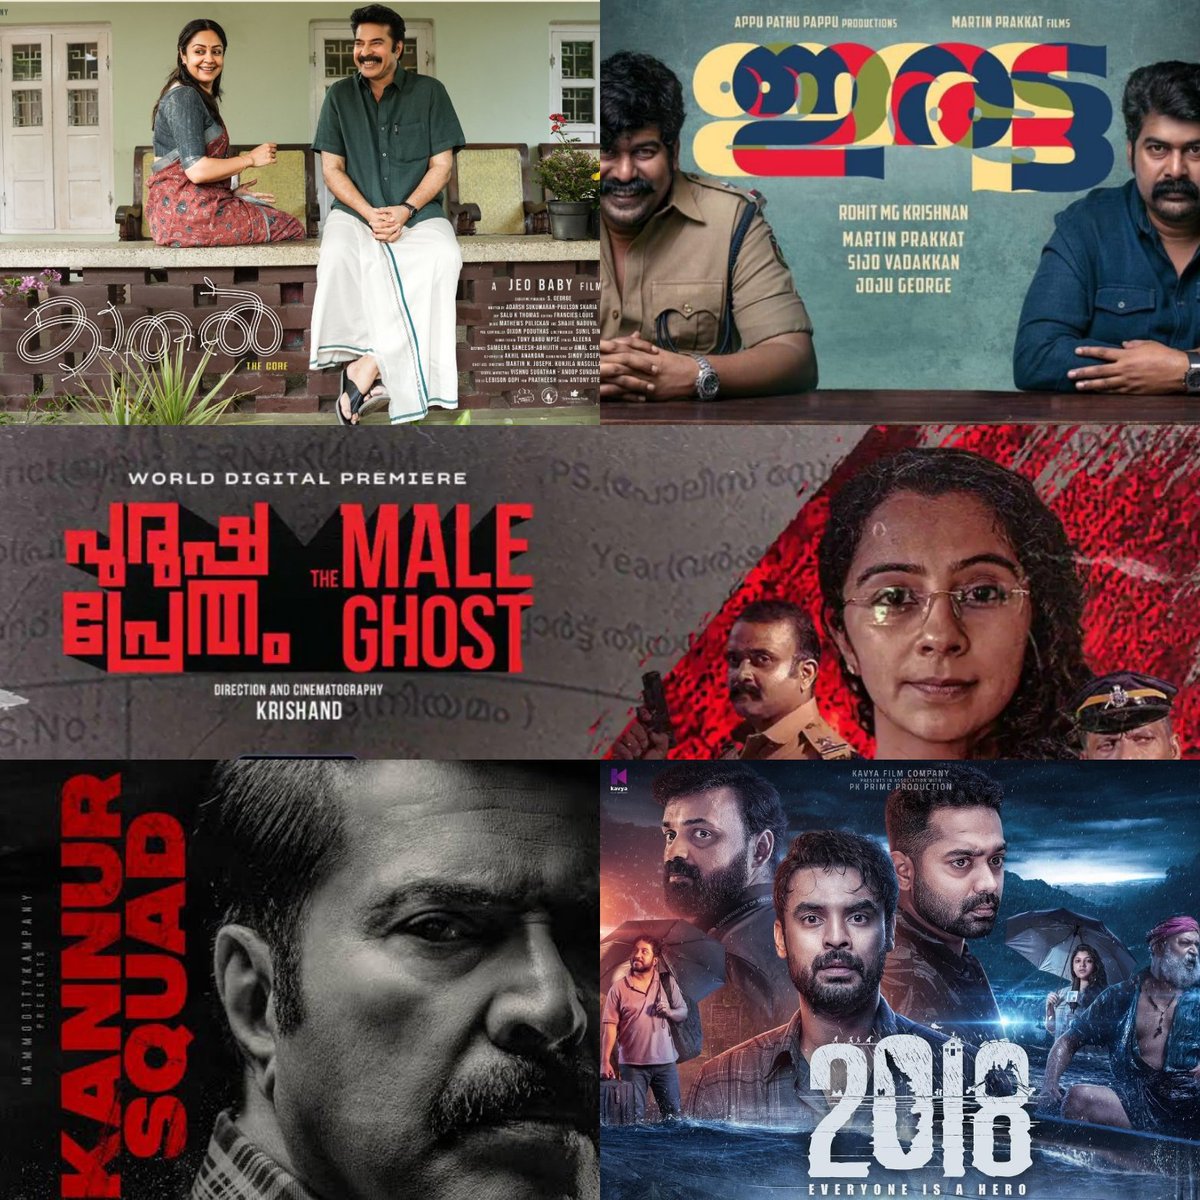 My Favorite Malayalam Movies of 2023 !!

Purushapretham by Krishanth
Kaathal by Jeobaby
Iratta by Rohith Krishnan
KannurSquad by Roby Varghese
2018 by Jude

#2023Rewind